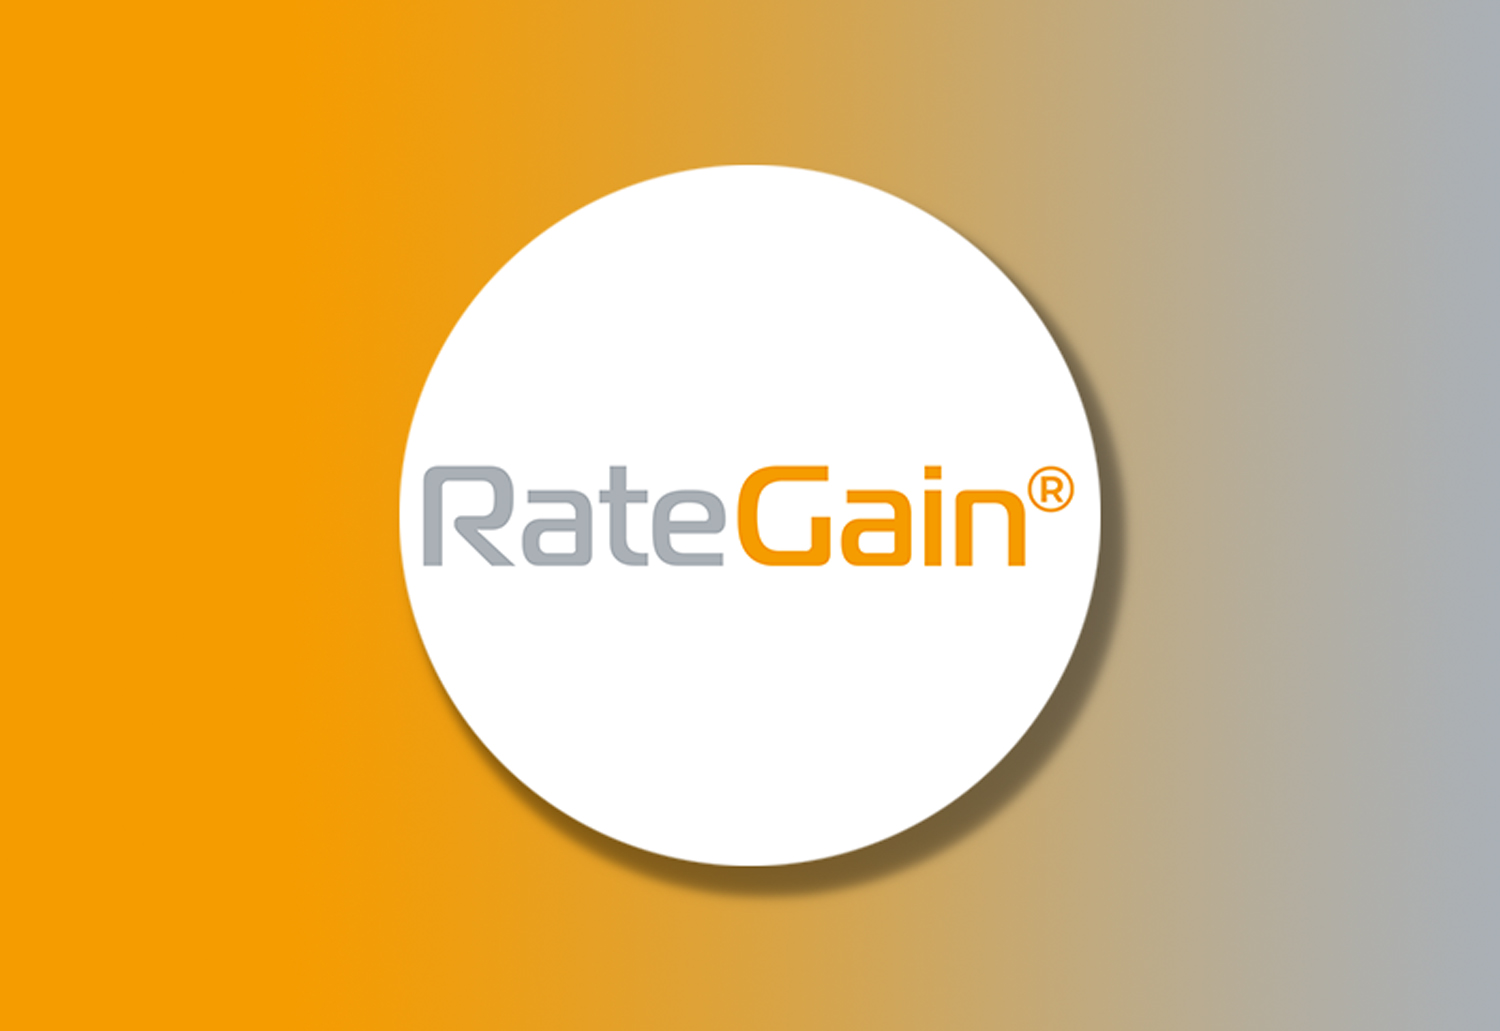 RateGain enters into an agreement to acquire Adara and form the World’s Most Comprehensive Travel-Intent and Data Platform